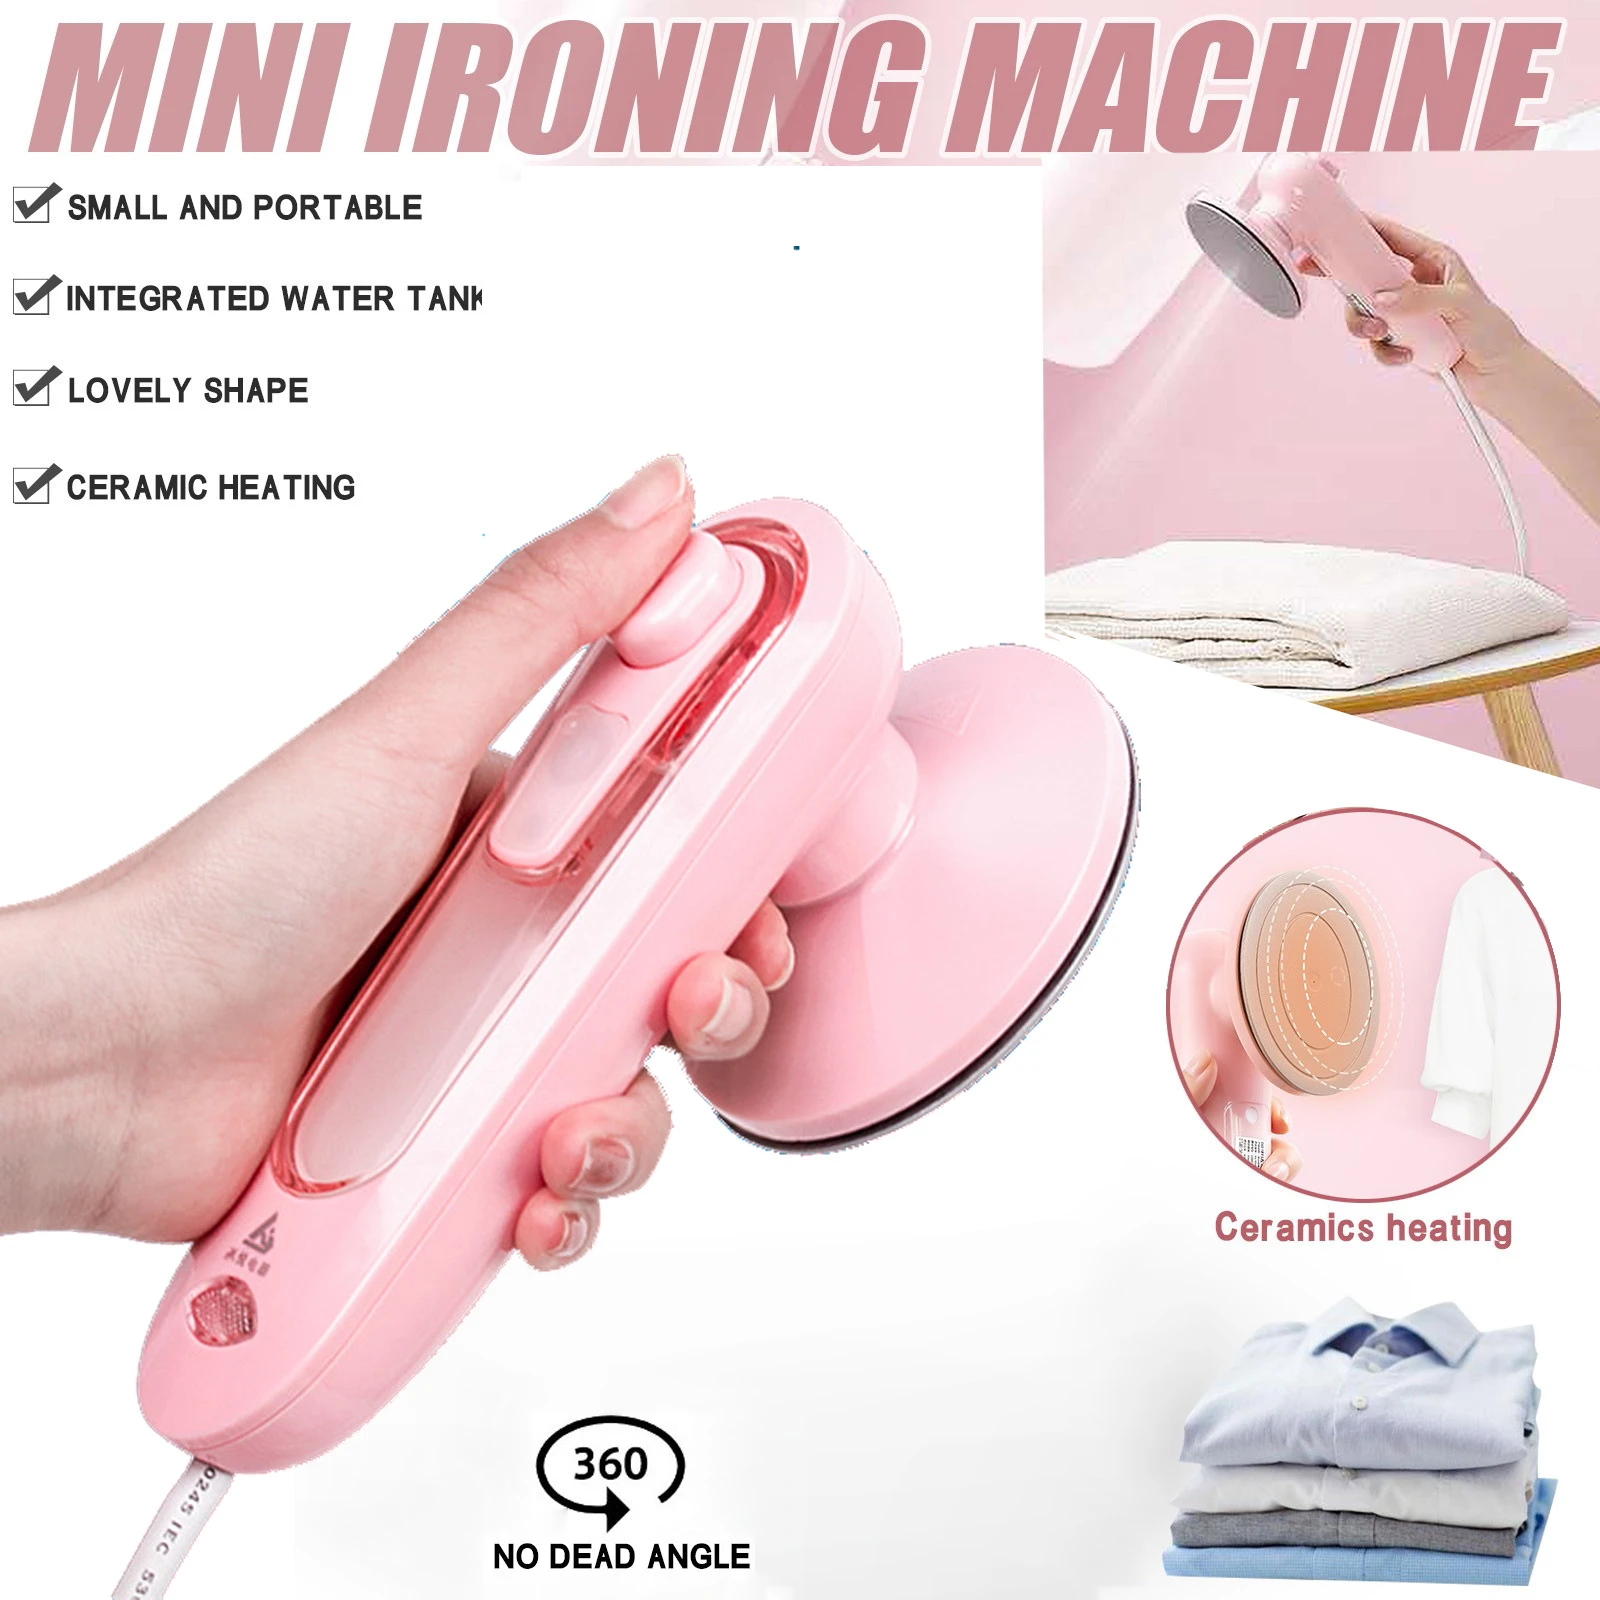 Mini Electric Dry Iron Machine With Spray Water Portable Fast Heat Clothes Handheld Garment Steamer For Home Dormitory Travel